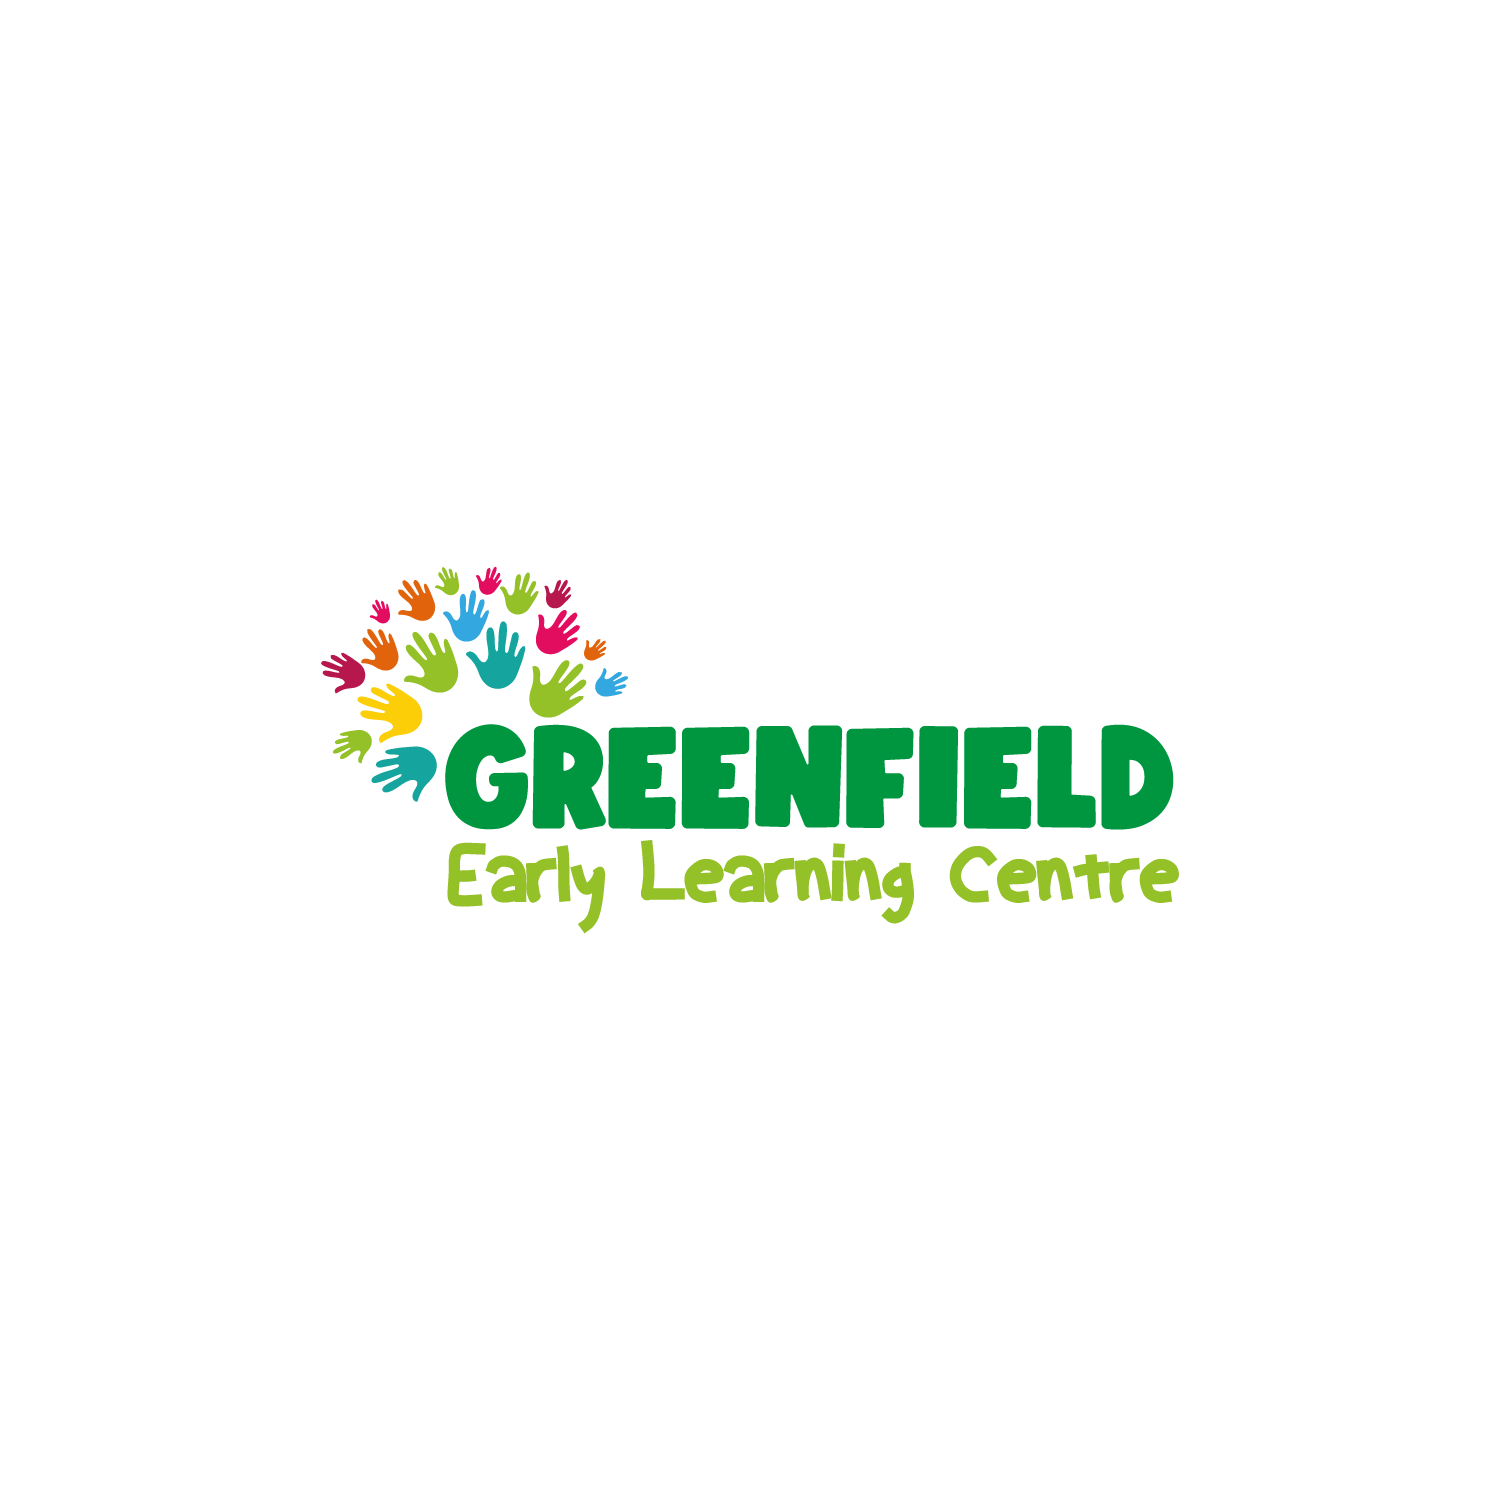 Greenfield Early Learning Centre